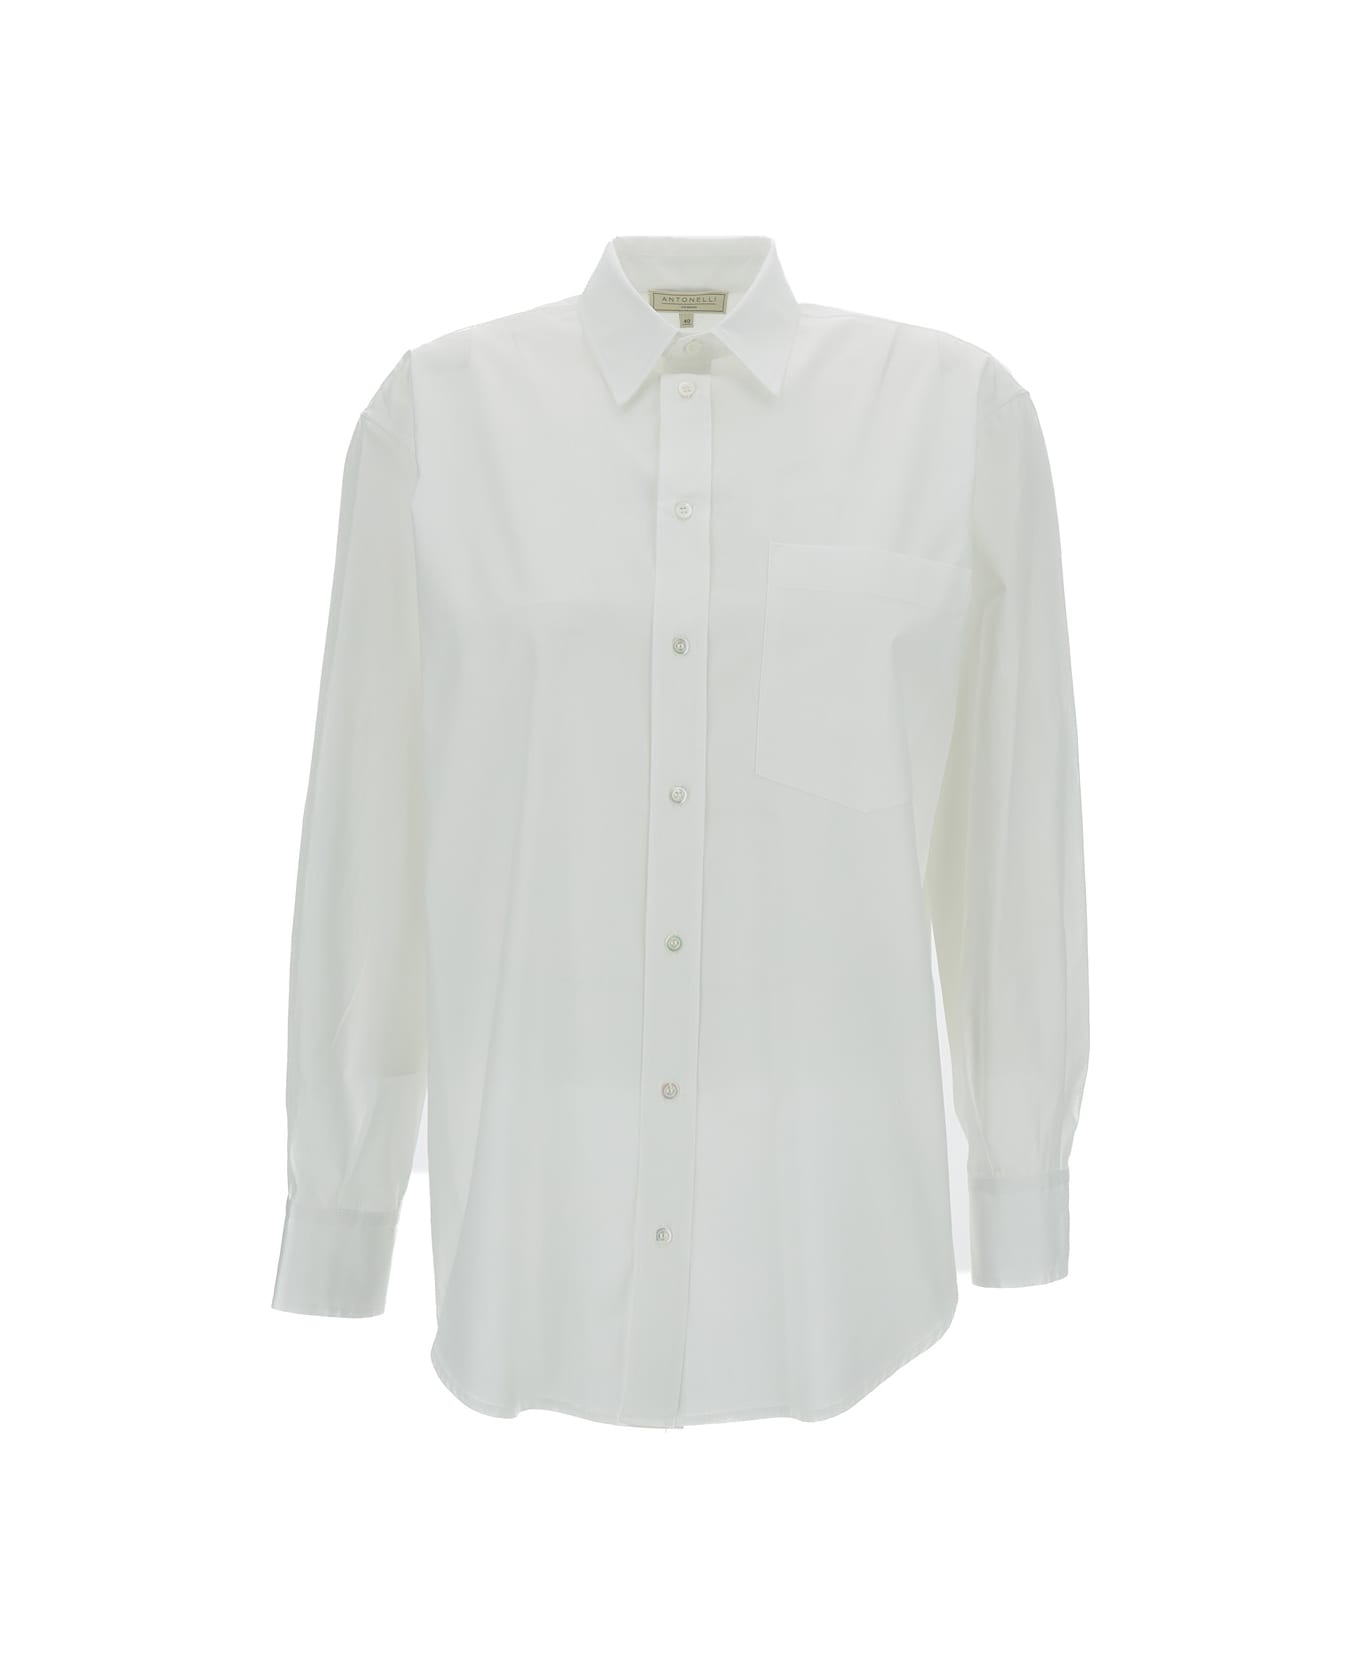 Antonelli White Shirt With Patch Pocket In Cotton Woman - White シャツ